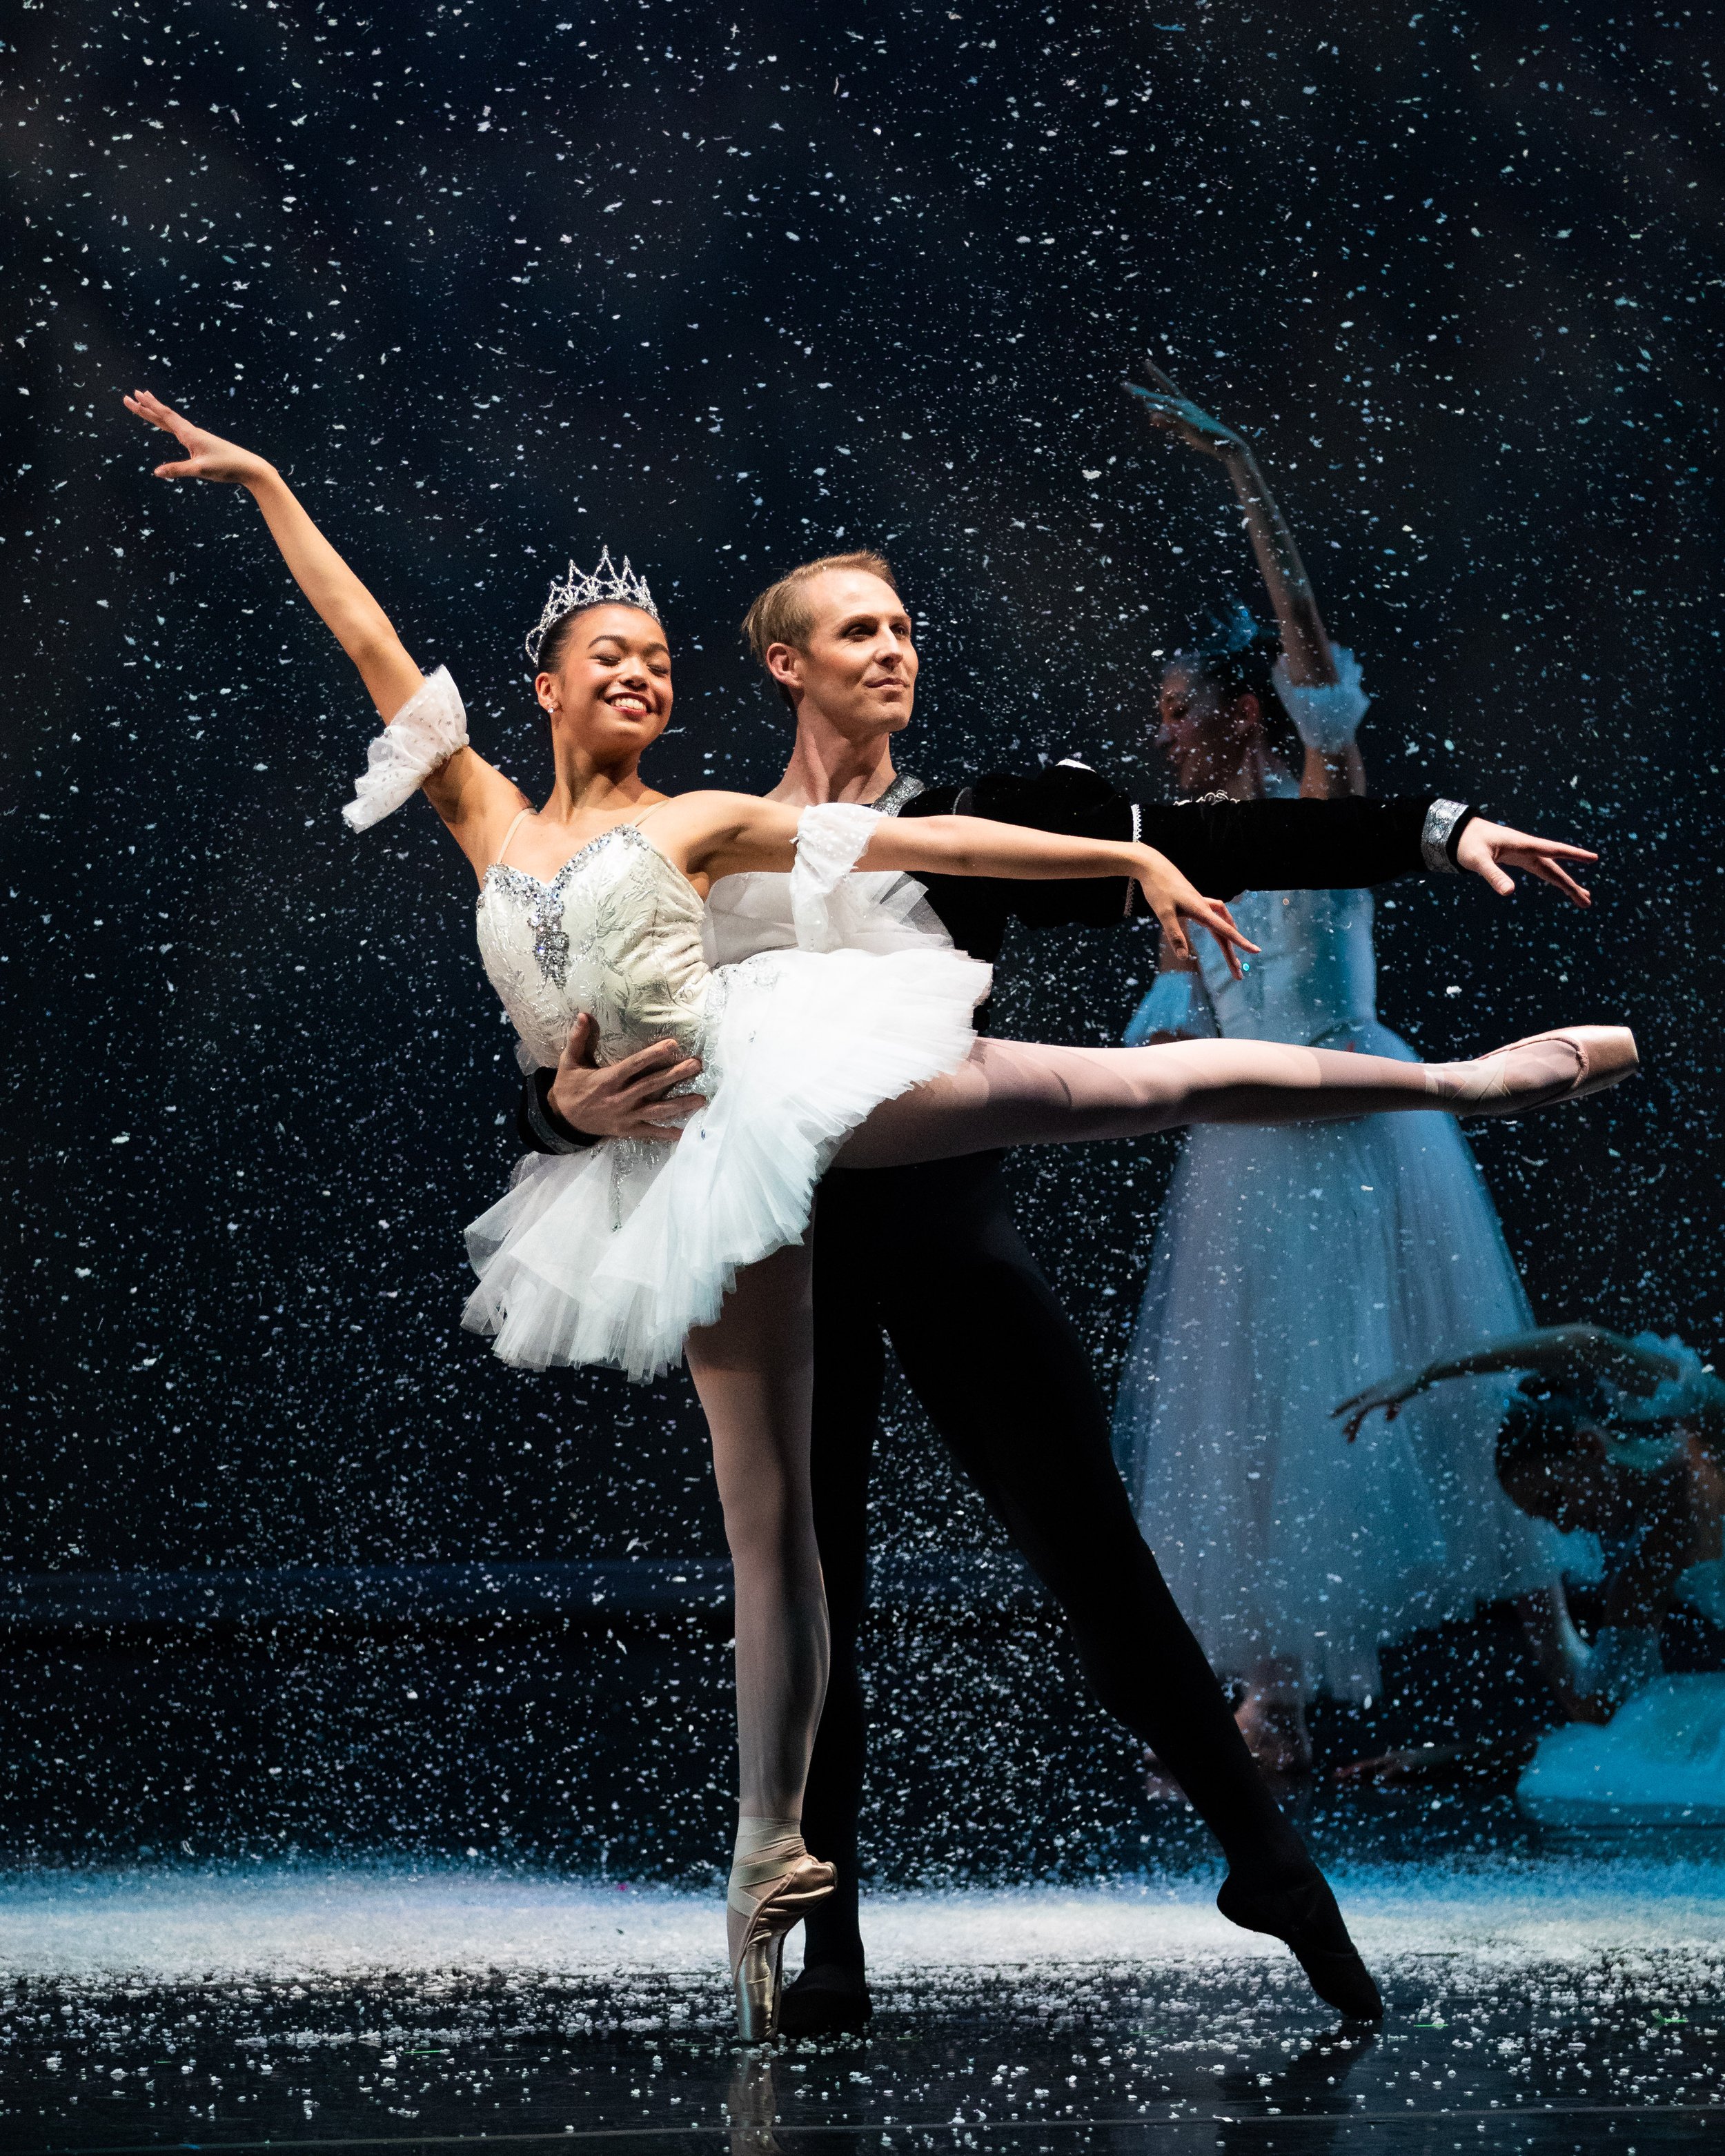  Kalea Harrision (left) and Evan Swenson (right) playing the roles of Snow Queen and Snow Cavalier during the first act, second scene of The Nutcracker performed by Westside Ballet of Santa Monica at the The Broad Stage in Santa Monica, Calif. on Sun